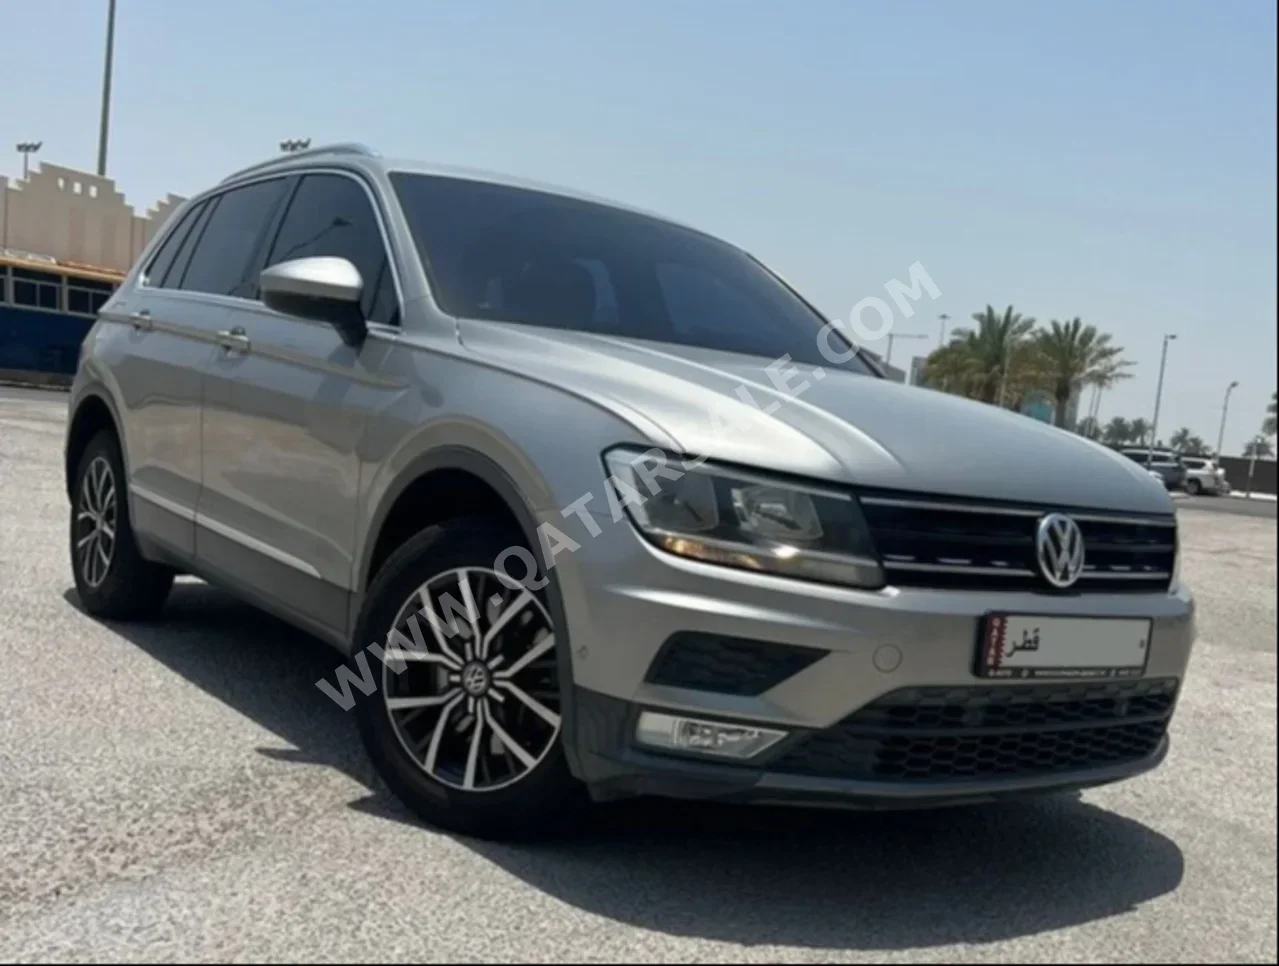 Volkswagen  Tiguan  2.0 TSI  2017  Automatic  199,000 Km  4 Cylinder  All Wheel Drive (AWD)  SUV  Silver  With Warranty